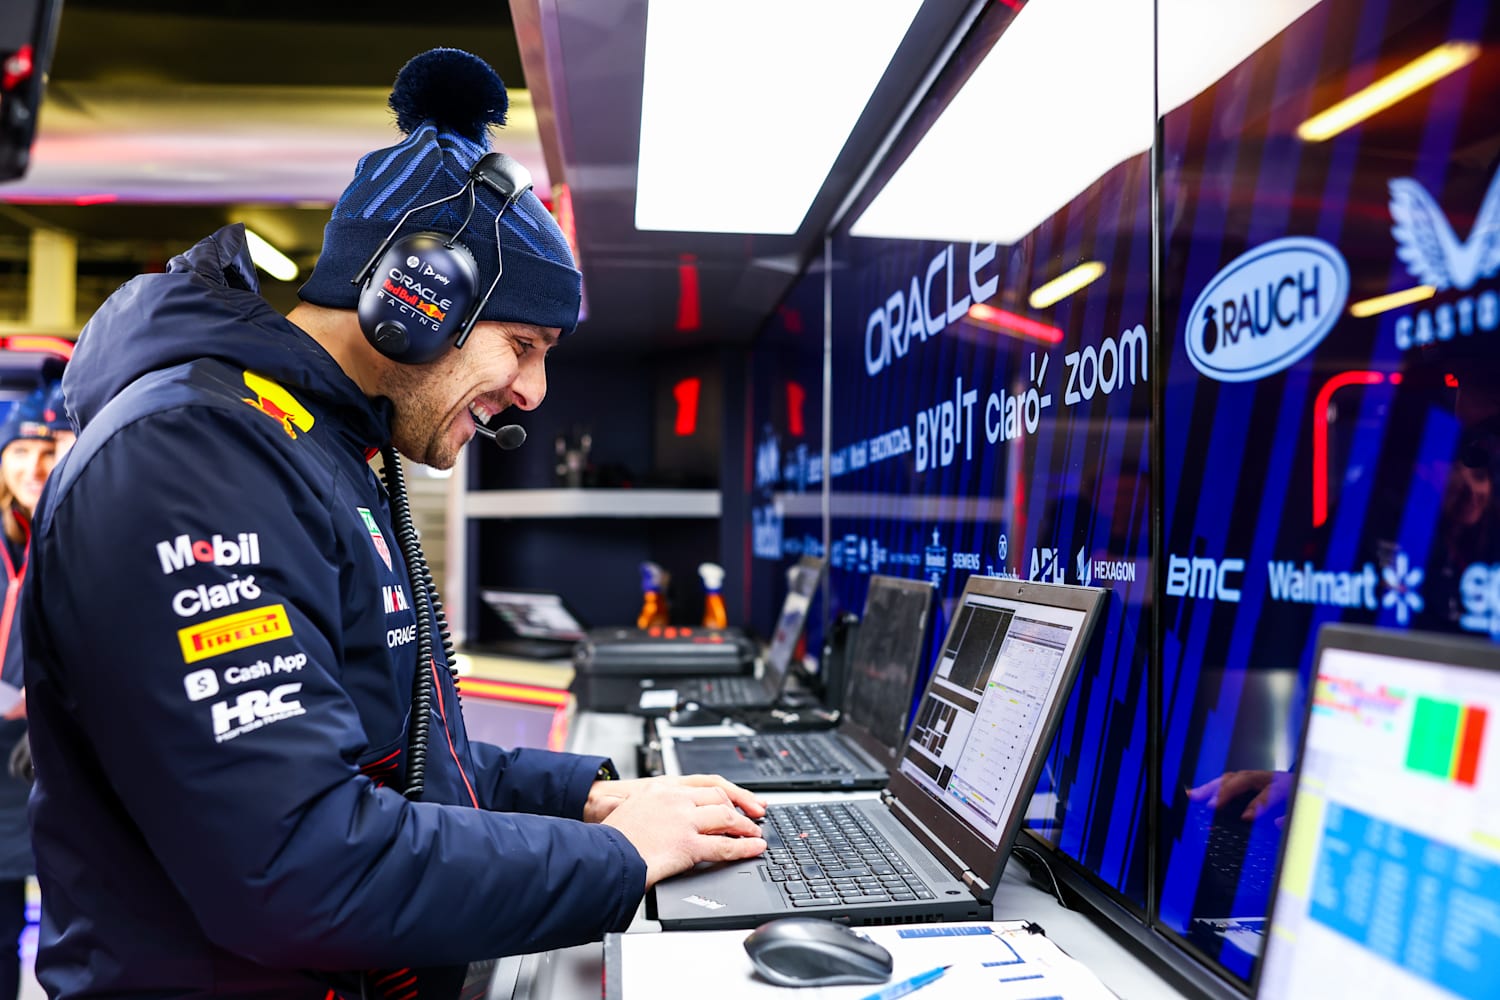 Poly + Red Bull Racing, Win Together  Poly, formerly Plantronics & Polycom